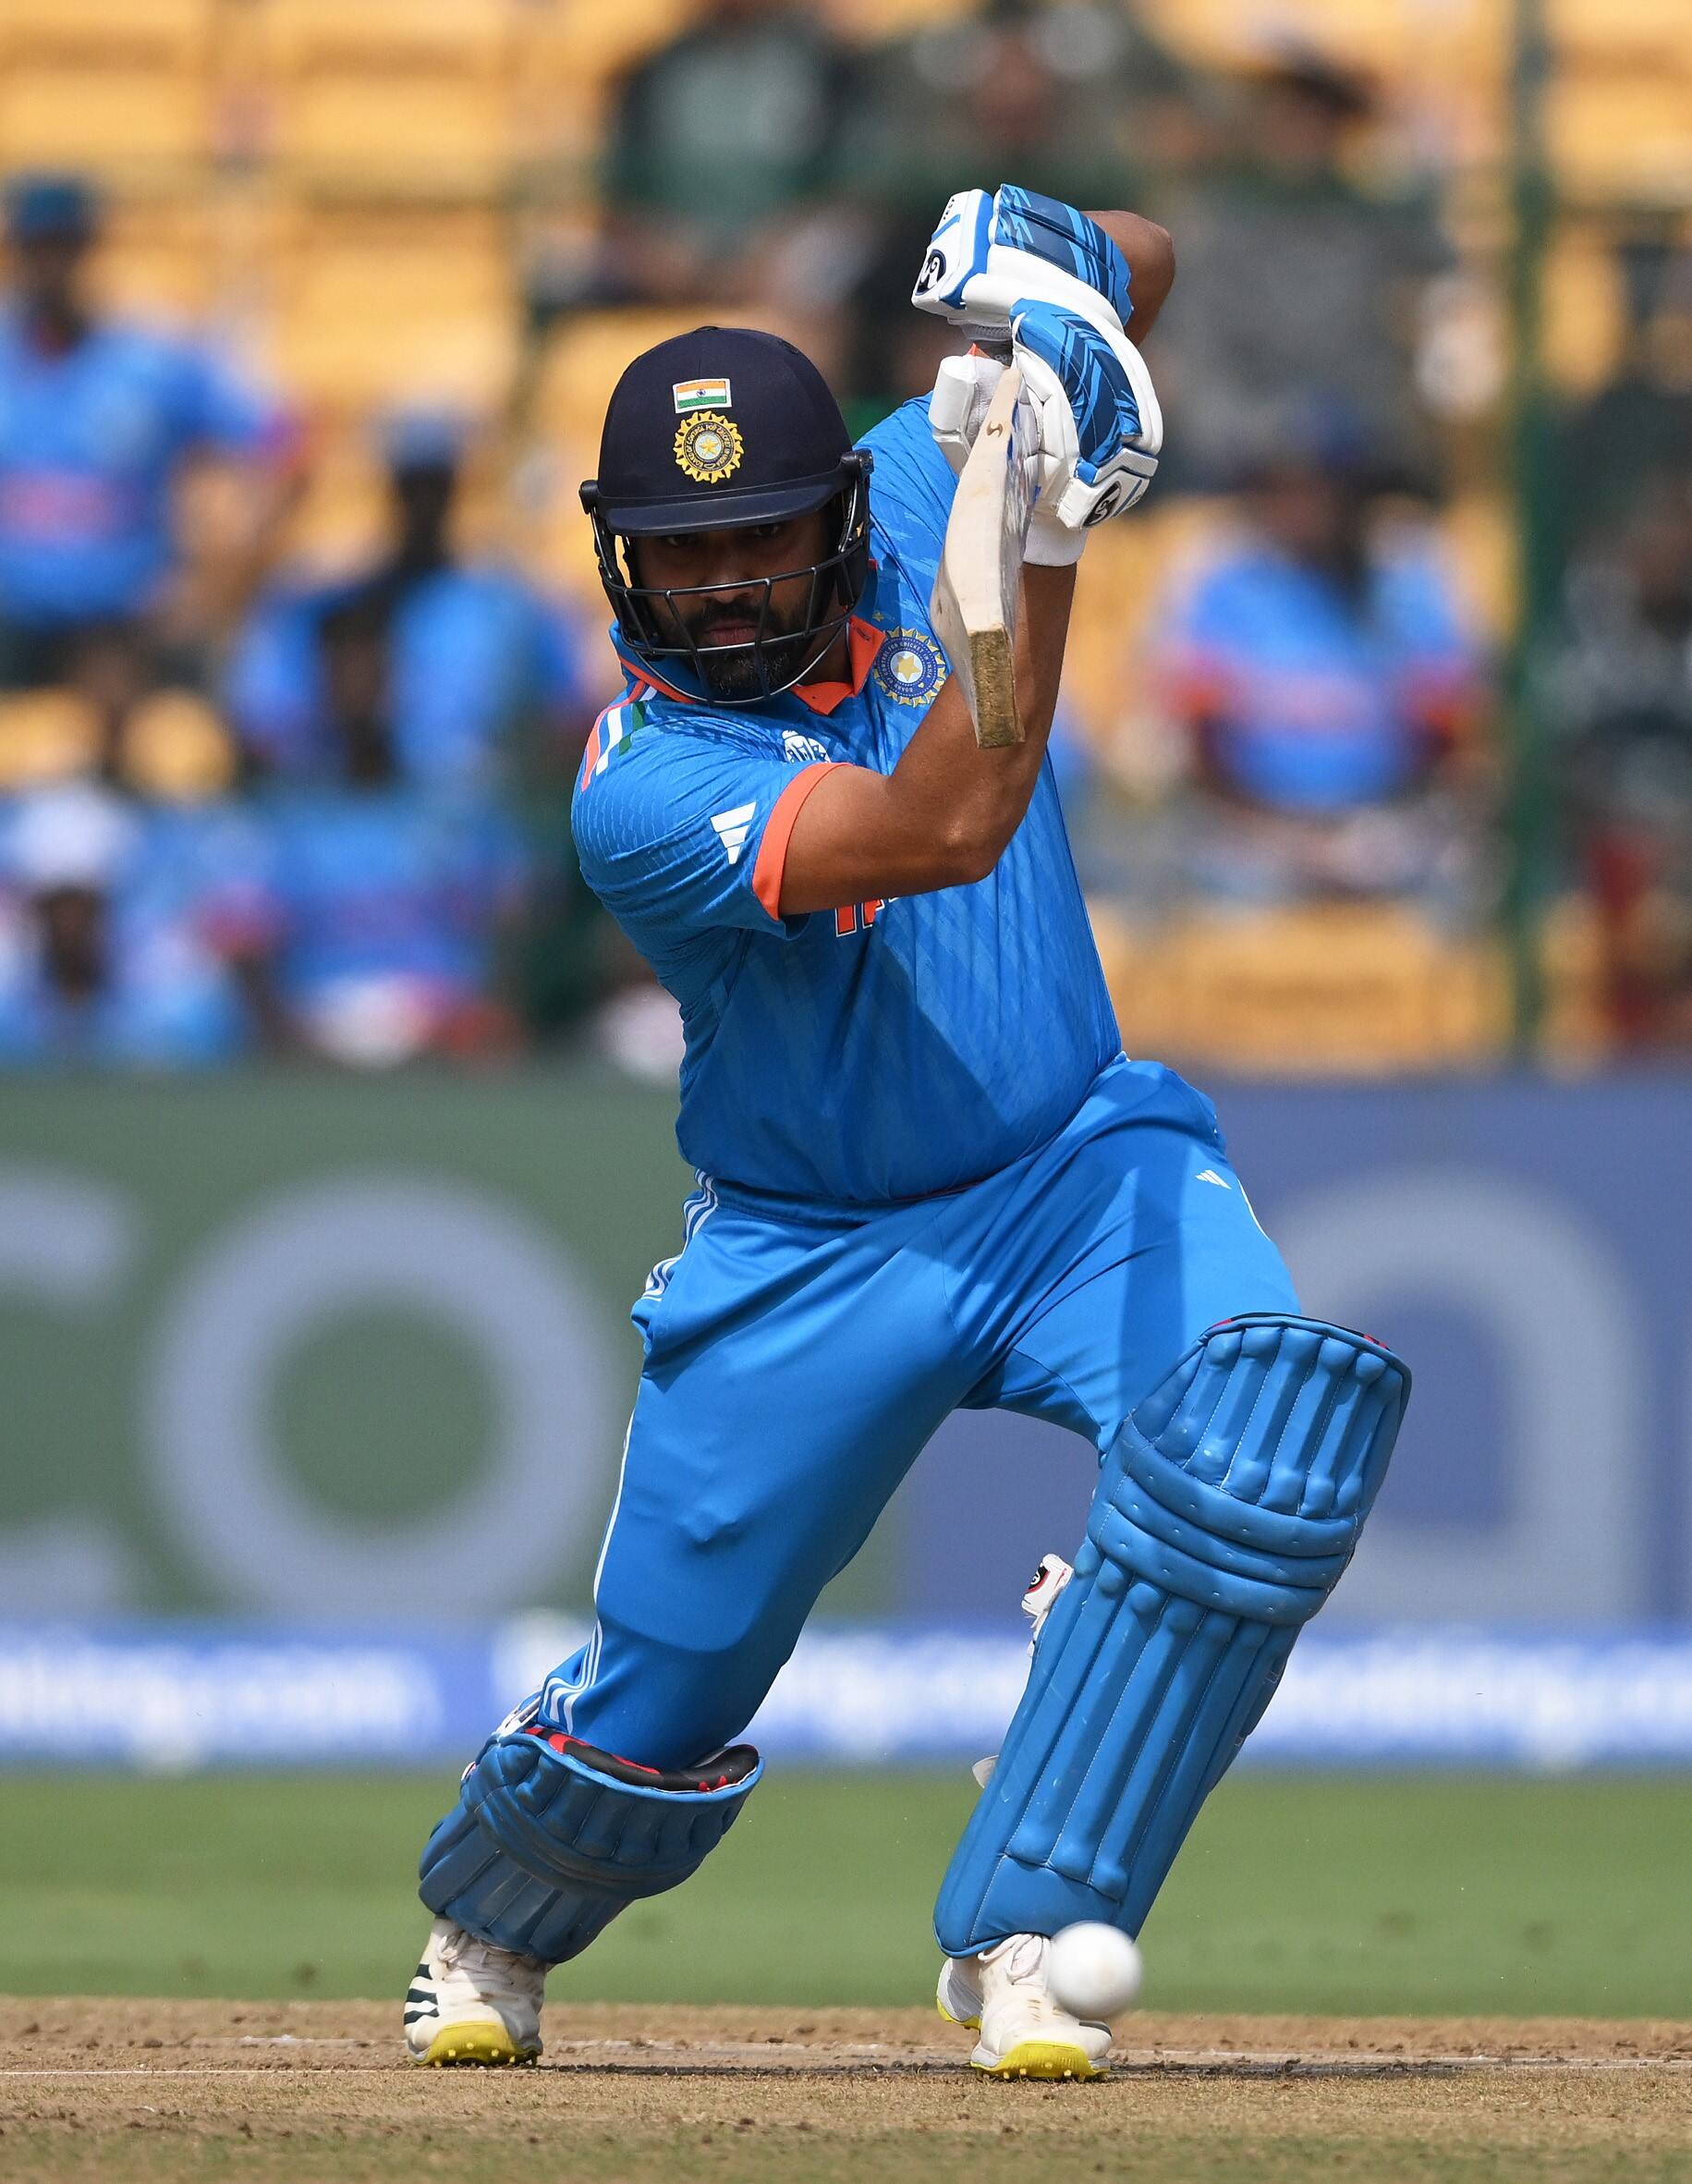 India Scored 410 Runs against Netherlands in 45th Match of World Cup Cricket 2023 at Bengaluru rsk